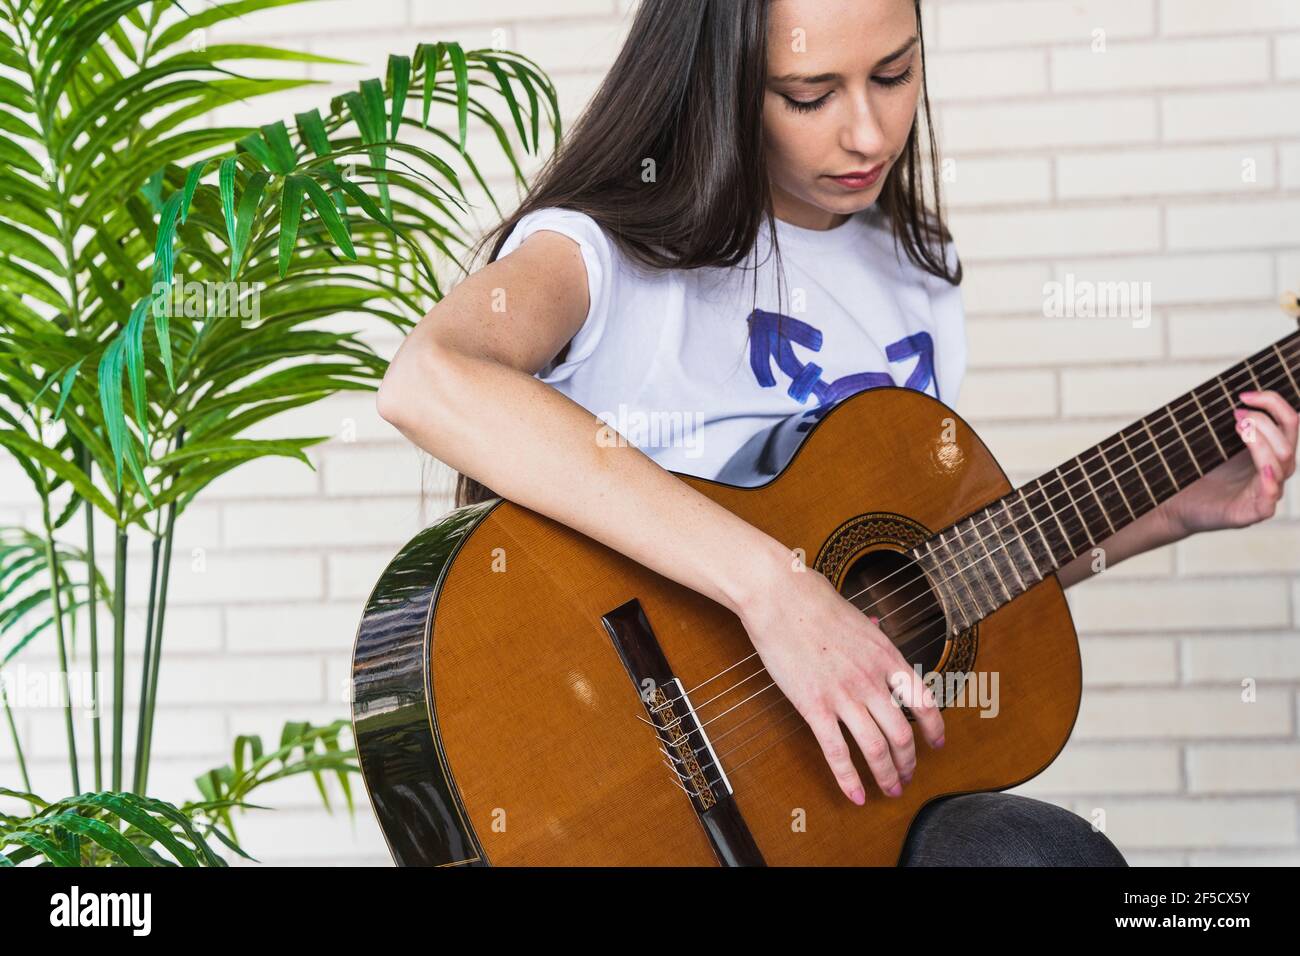 Young brunette in t shirt with transgender symbol sitting near green plant and playing Spanish guitar against brick wall Stock Photo